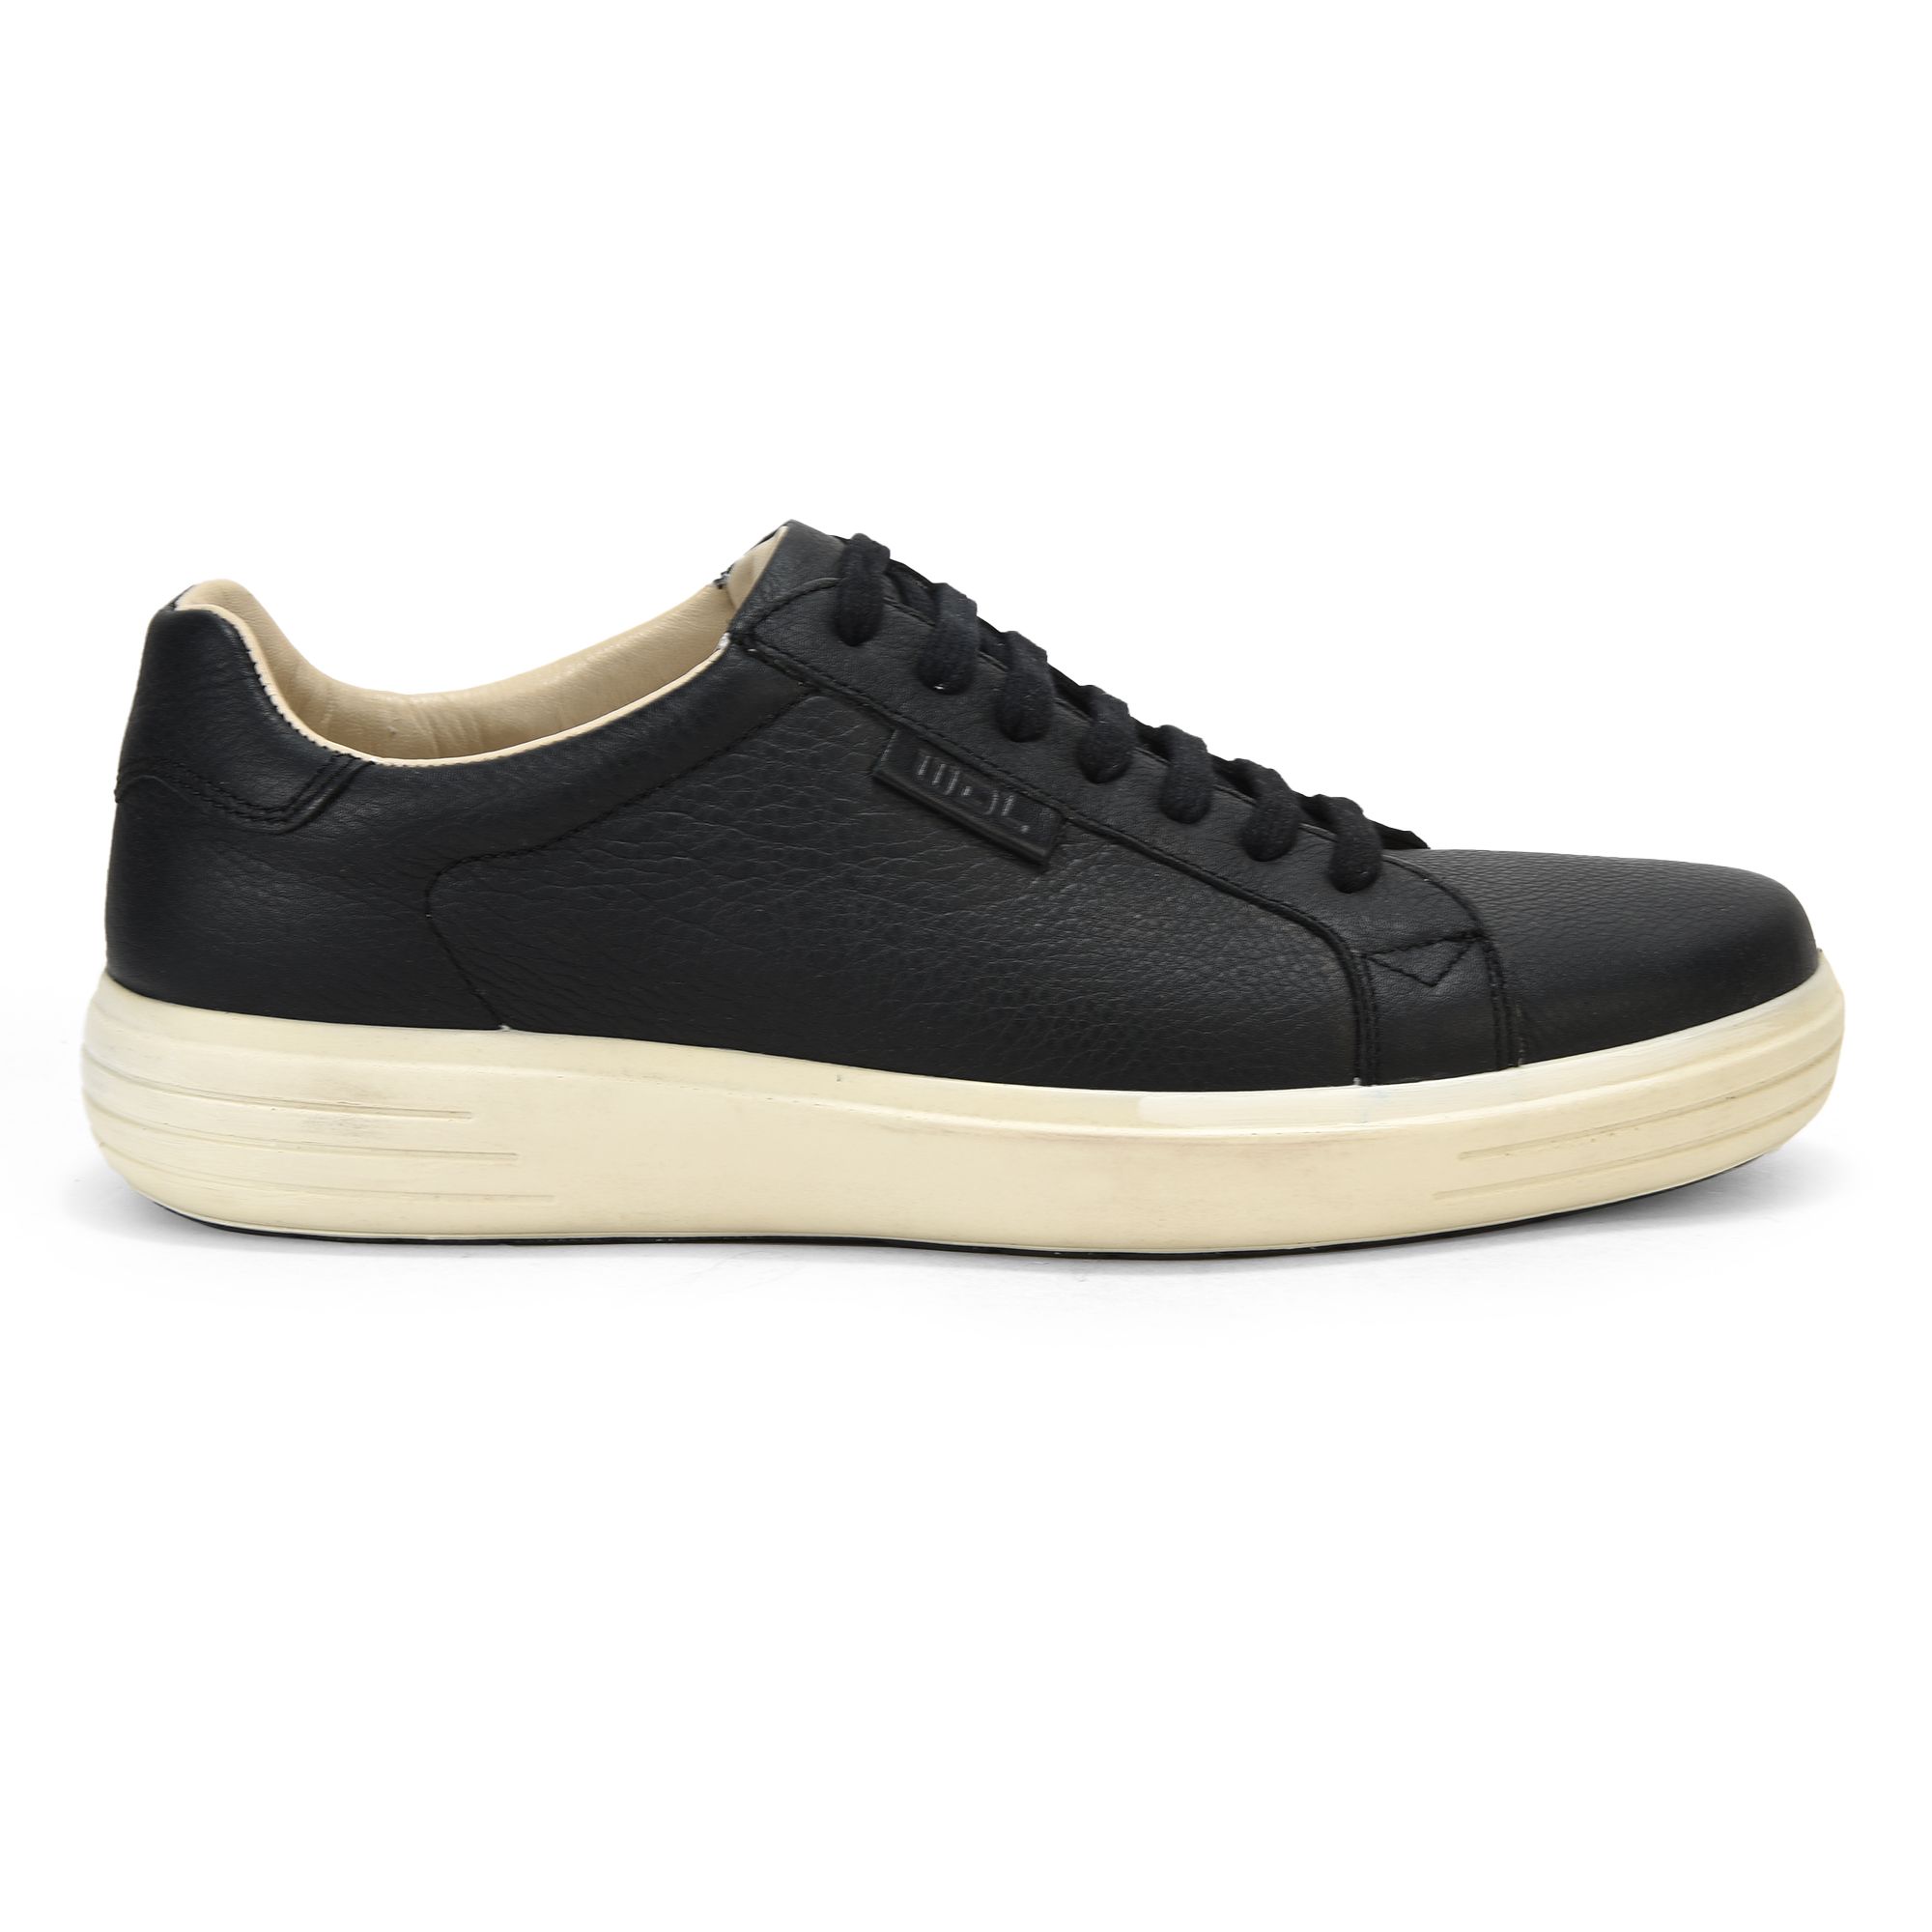 Black casual shoes for Men